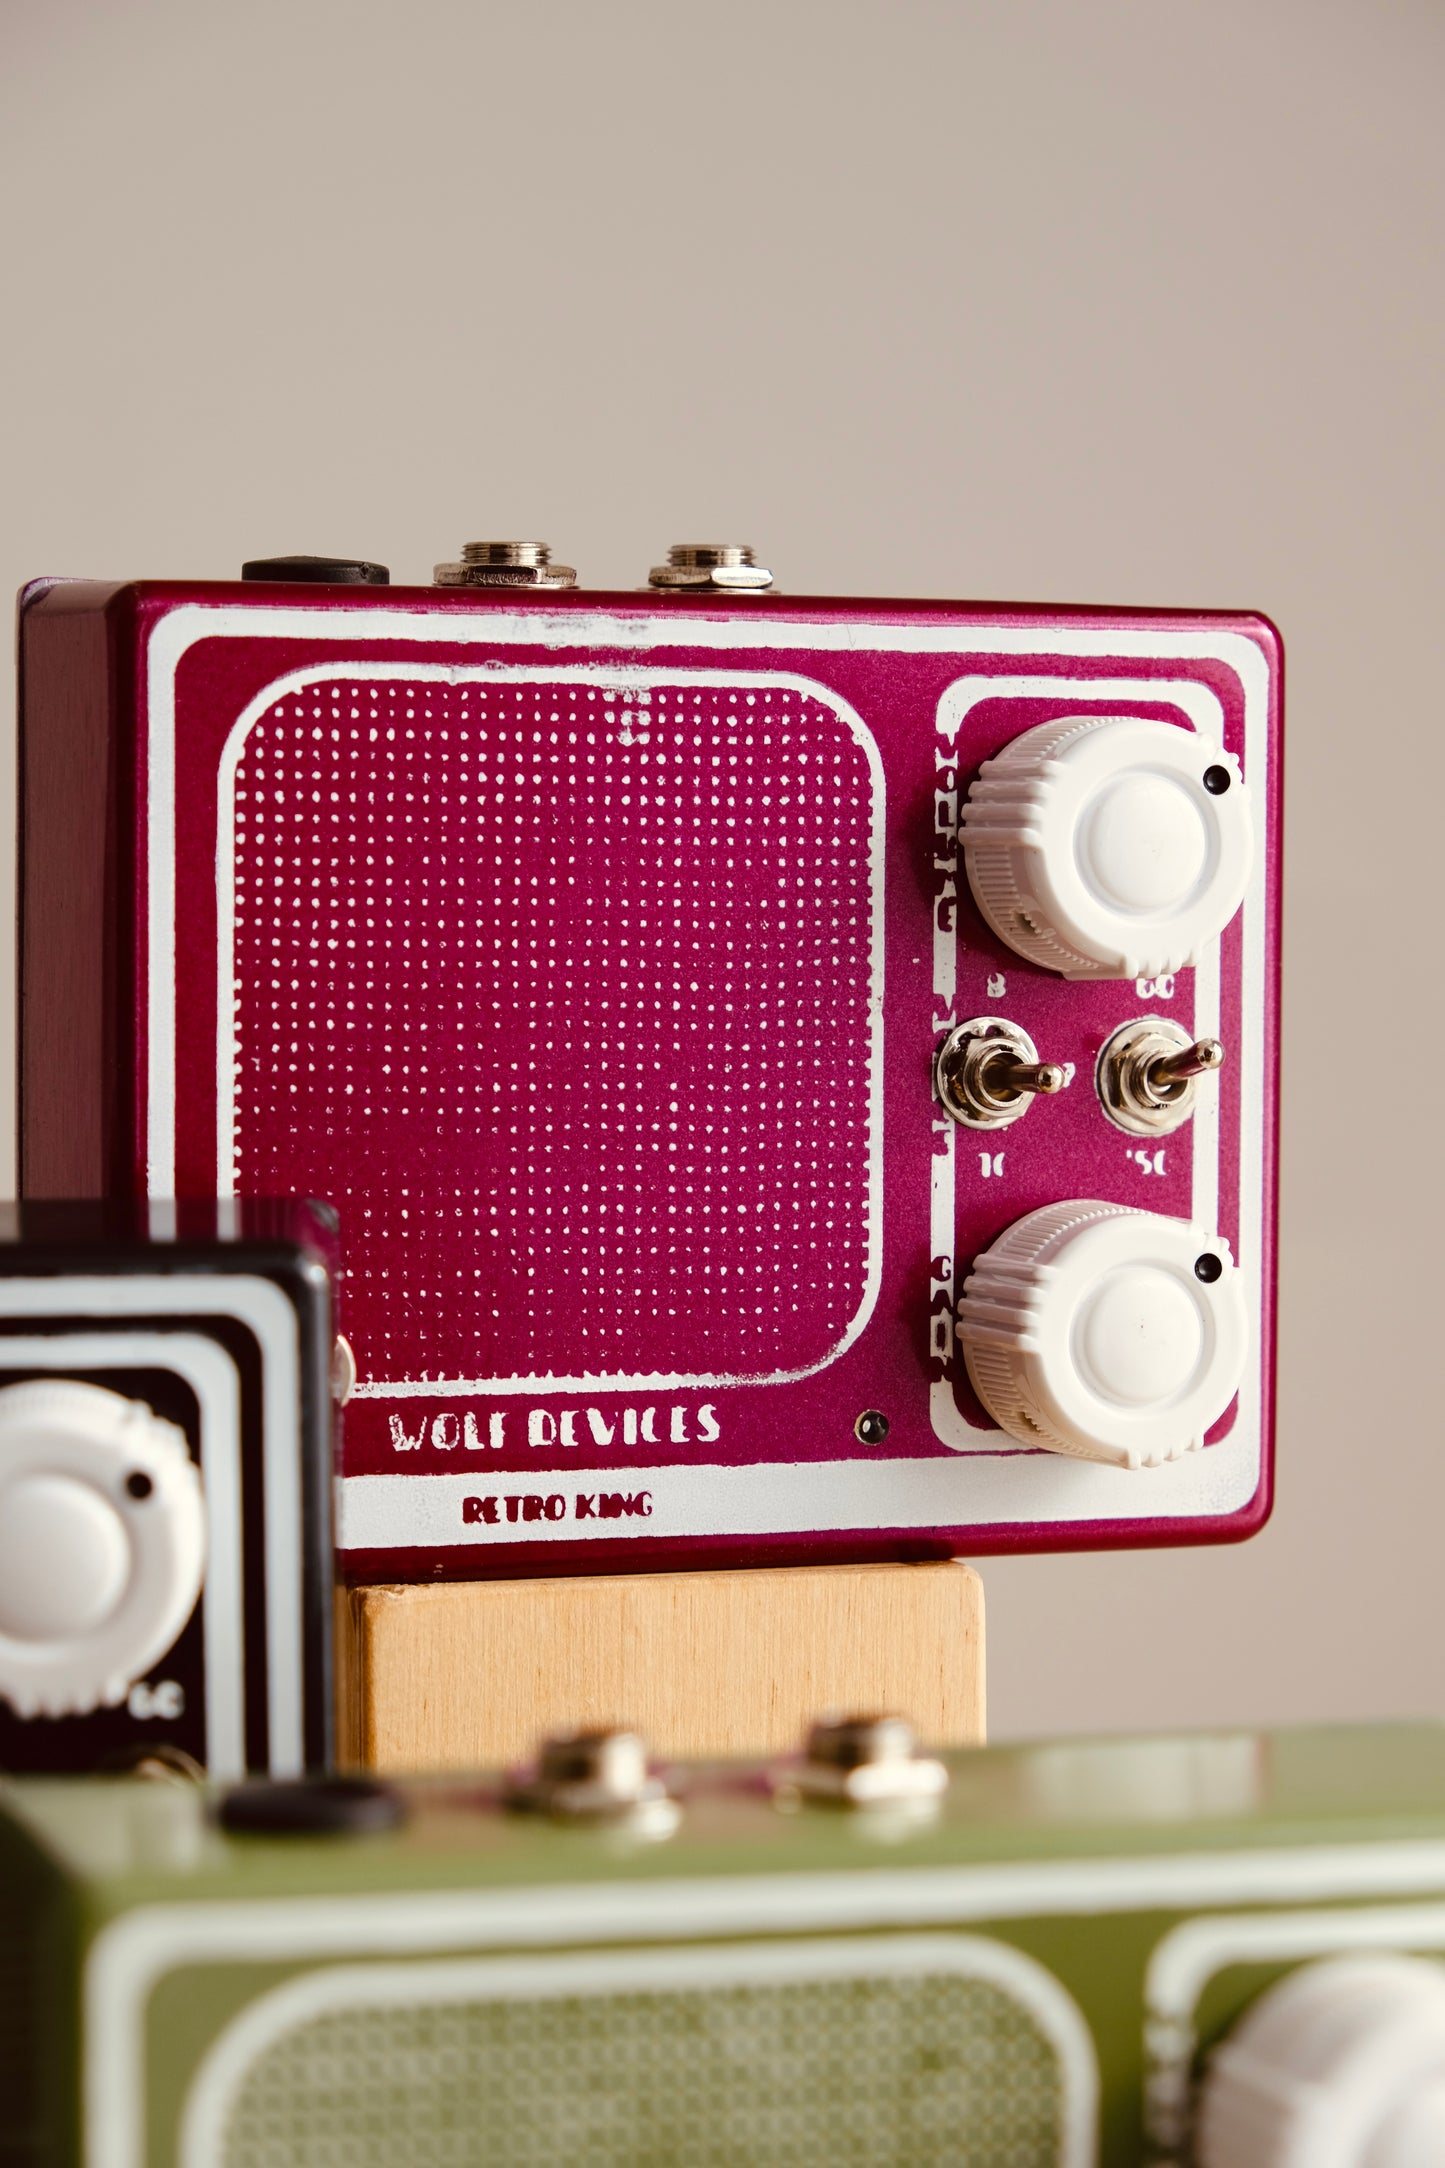 Wolf Devices - Retro King (Germanium & Silicon Overdrive) - Magenta